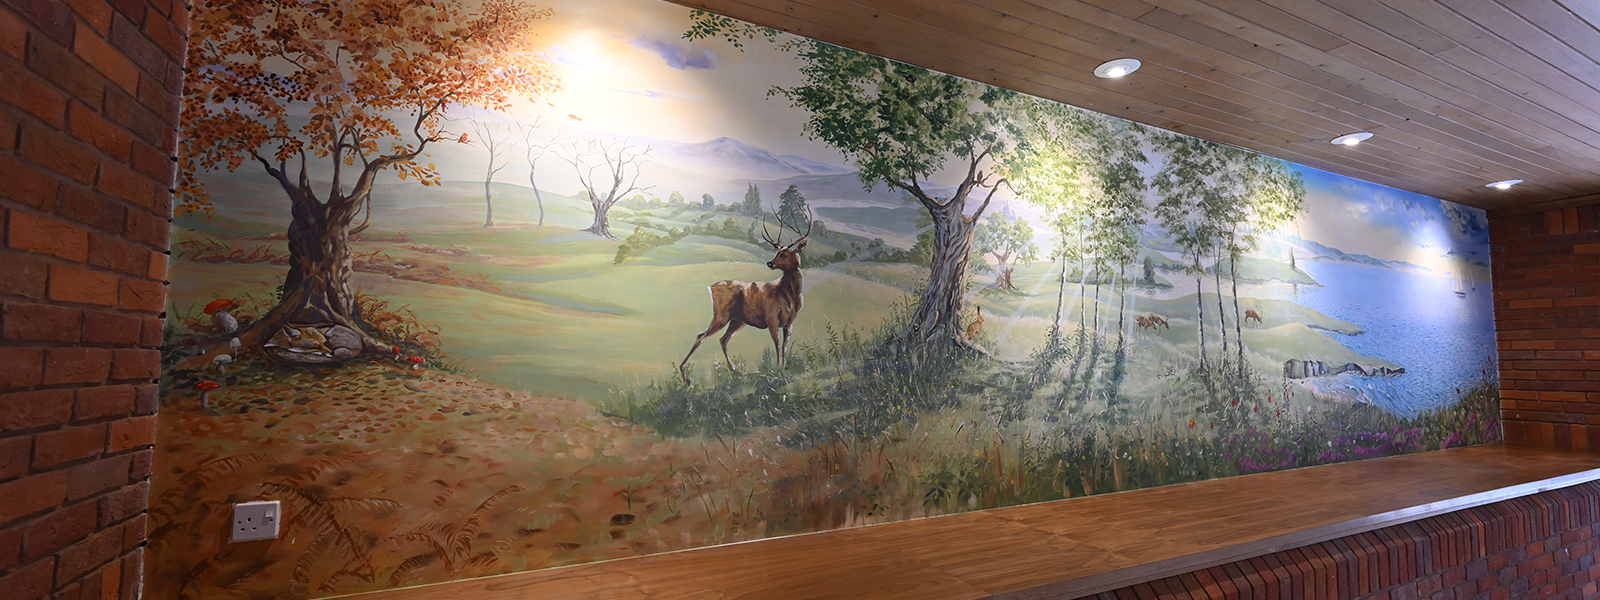 Painted stag mural at the Halo Ceremony Hall